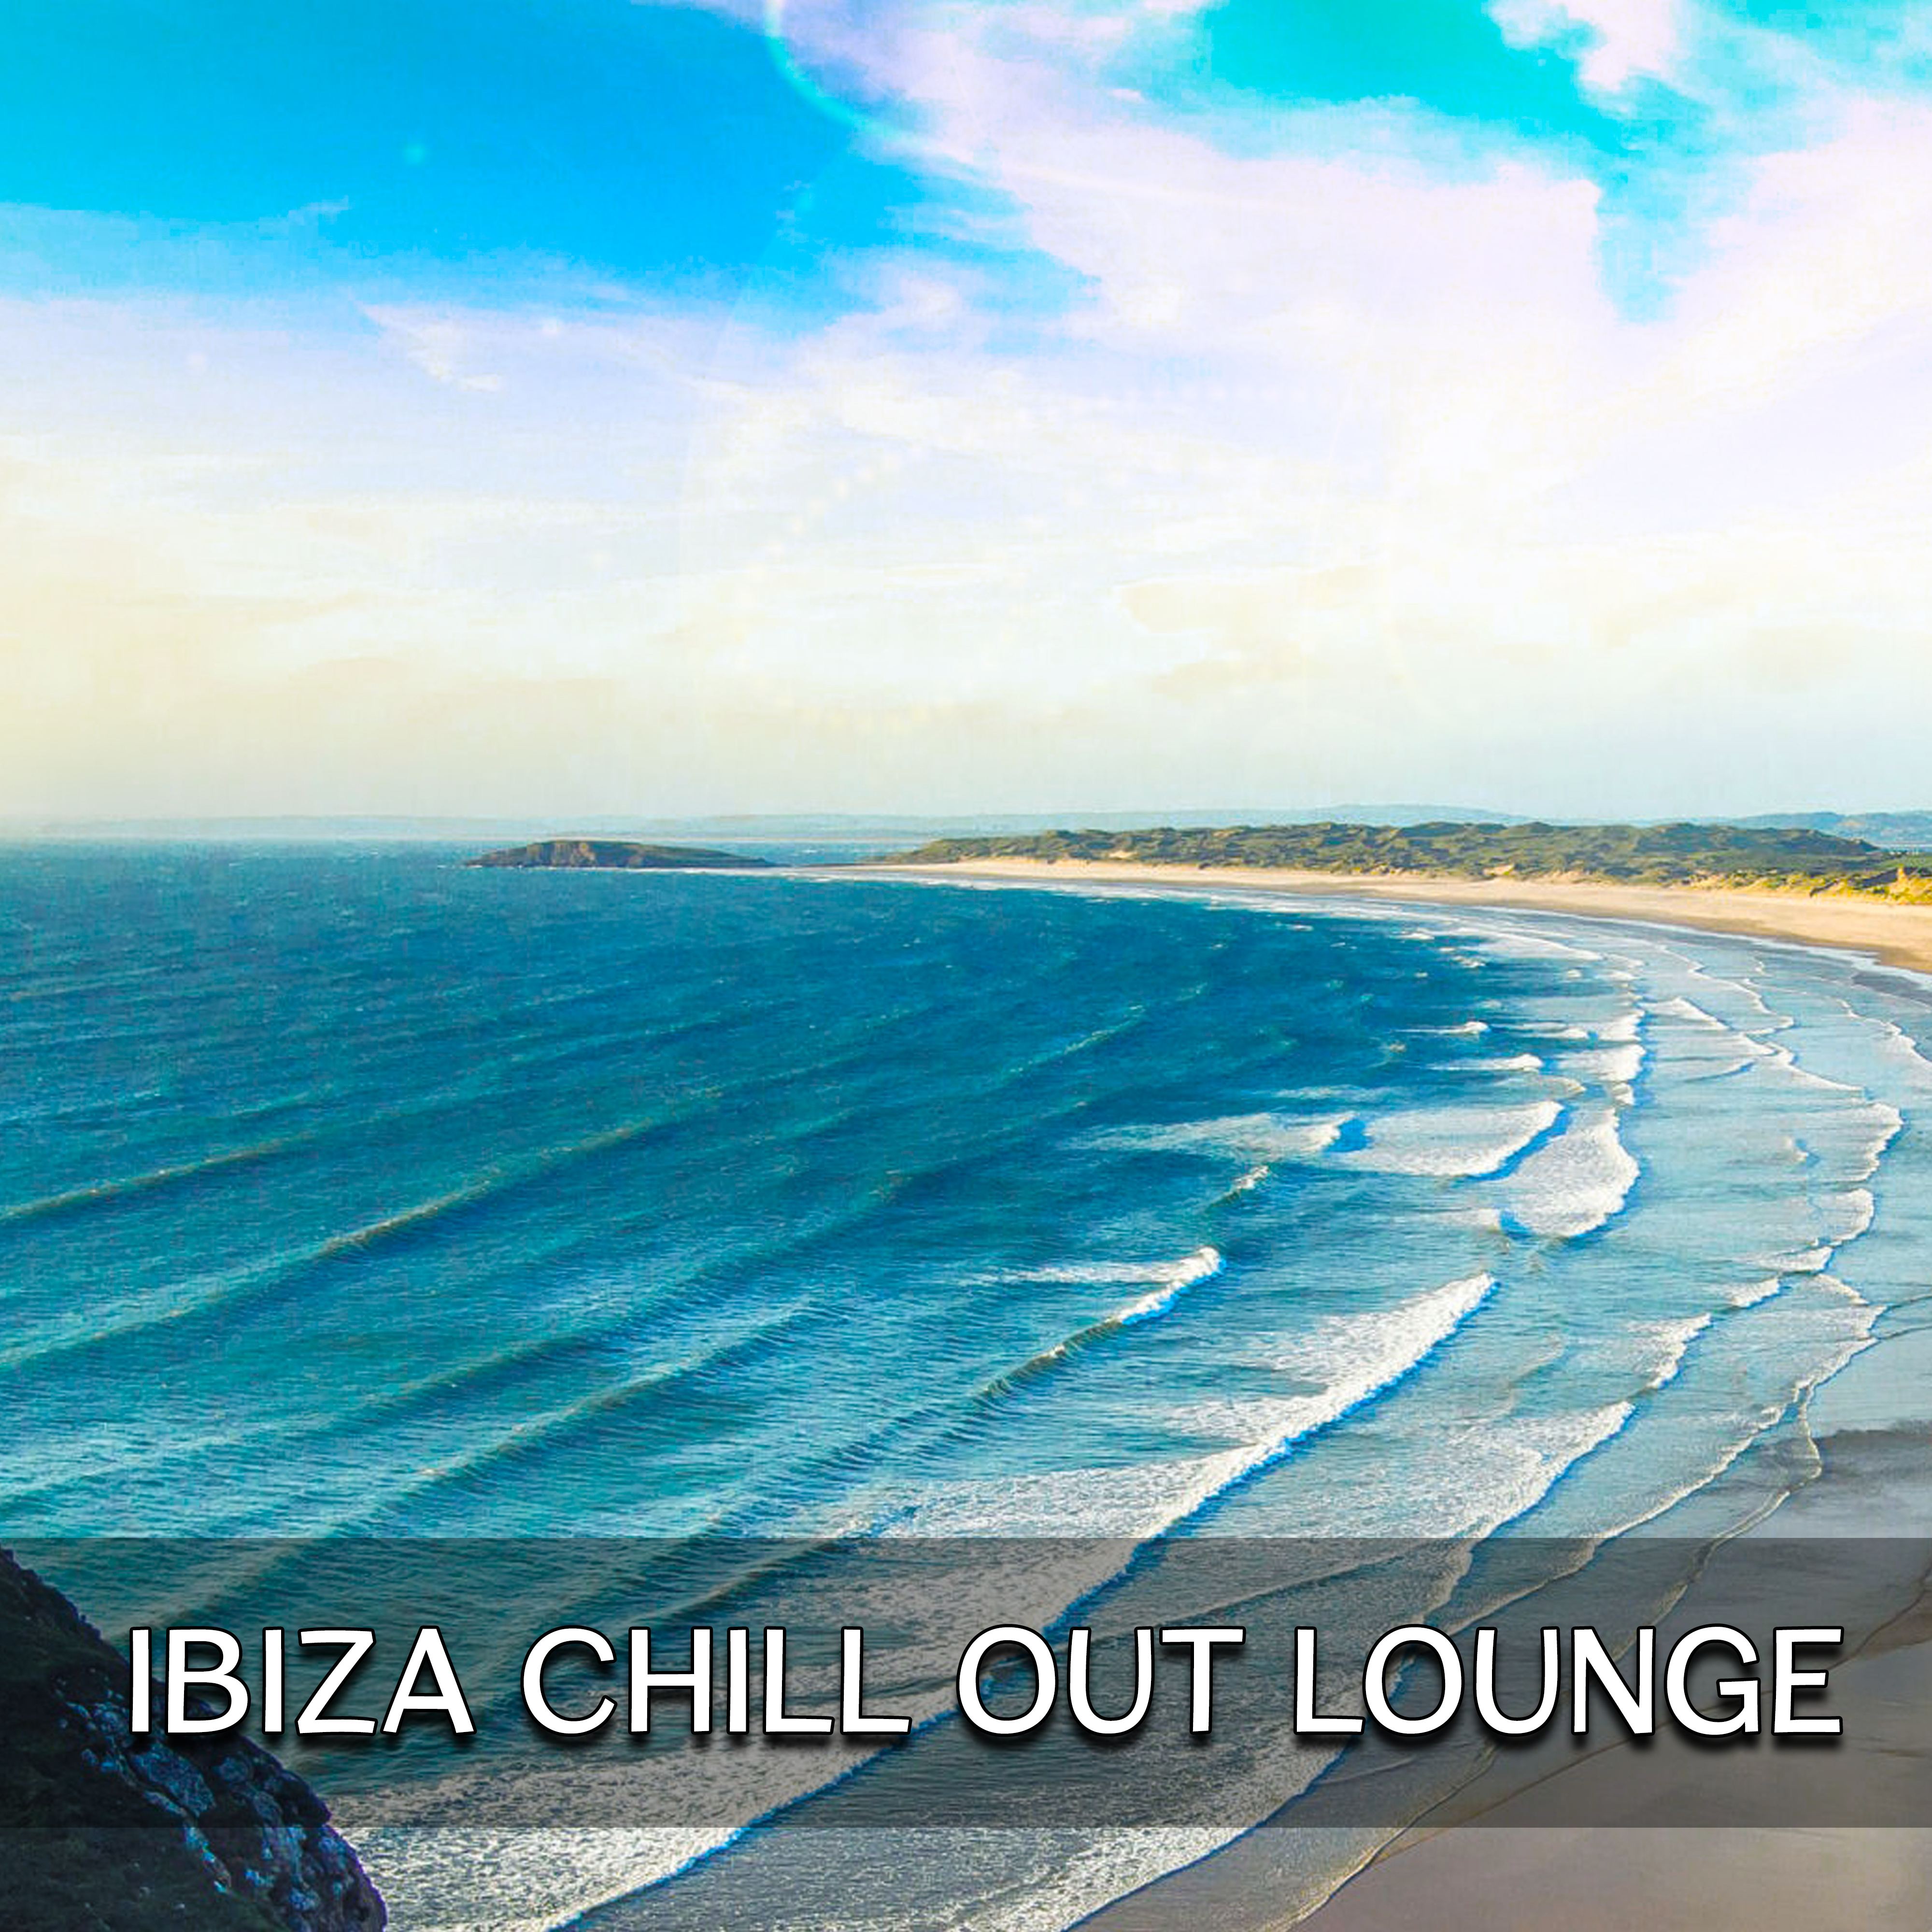 Ibiza Chill Out Lounge  Relaxing Time, Summer Lounge, Ibiza Beach, Chill Out Music, Calming Sun